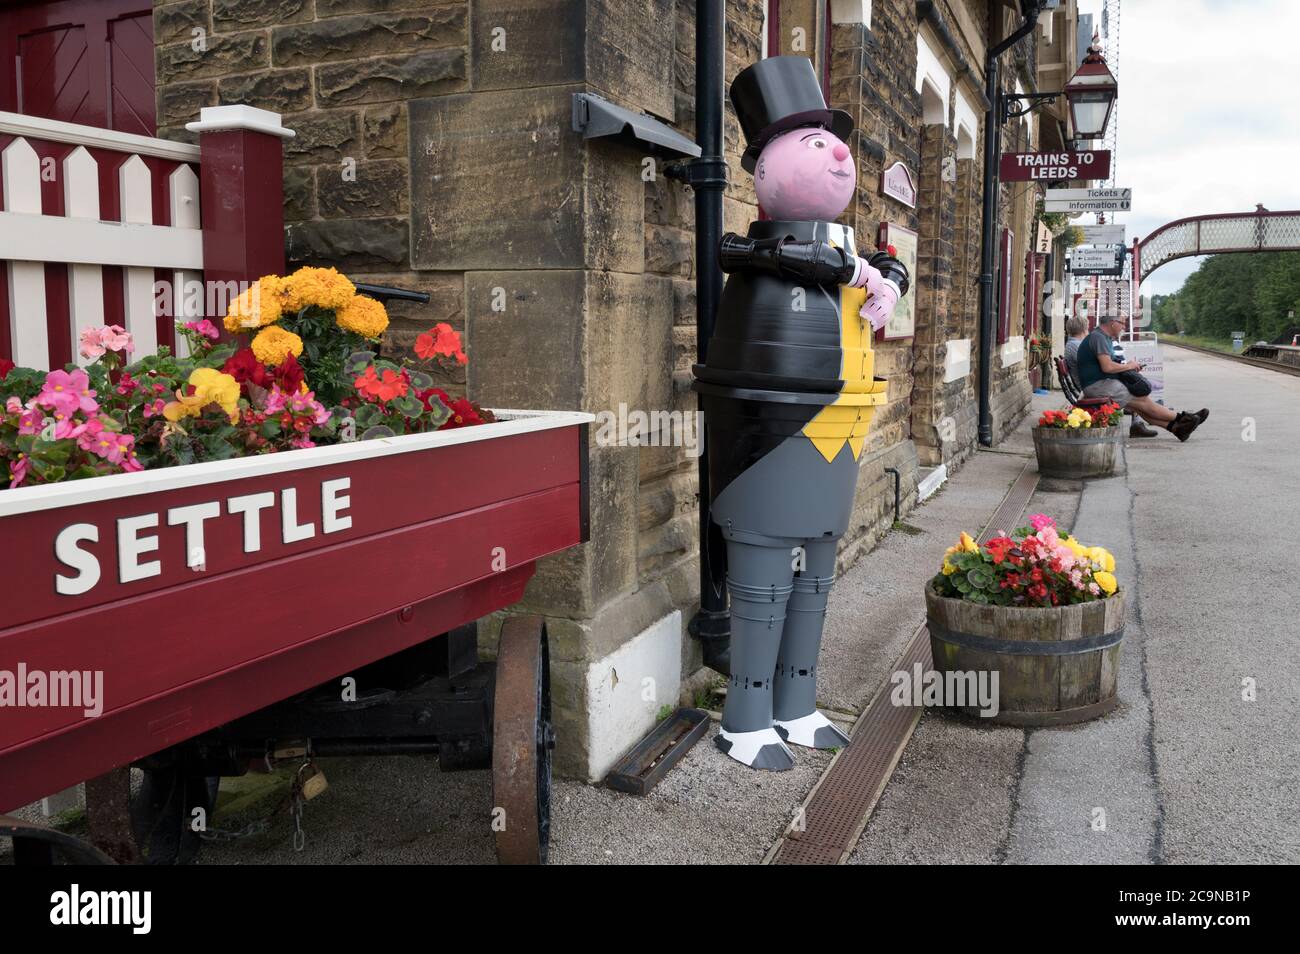 Settle, North Yorkshire, UK. August 1st 2020: The annual Flowerpot Festival opens in Settle, North Yorkshire, UK.  Topical flowerpot figures. made by local residents, appear all around the Yorkshire market town during August. Shown is The Fat Controller from the Thomas the Tank engine books, appropriately sited here on Settle station.This particular flowerpot figure was made by local resident Richard Handscombe. Credit: John Bentley/Alamy Live News Stock Photo